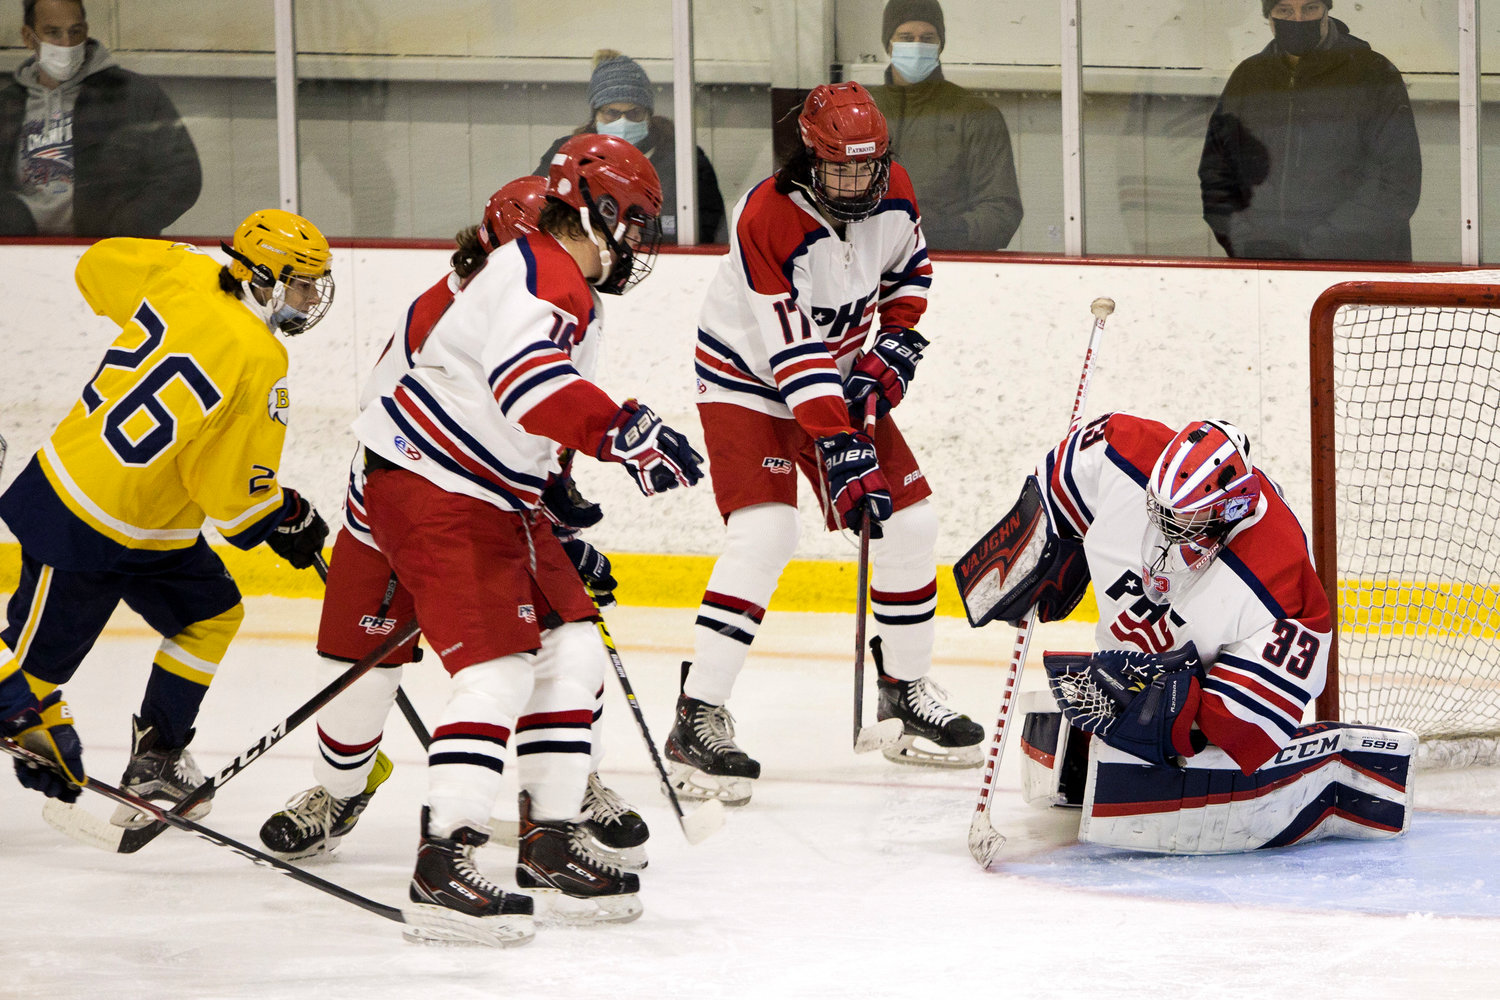 The Portsmouth defensive line protects the net, helping goalie Stephen Dutra stop a Barrington shot.